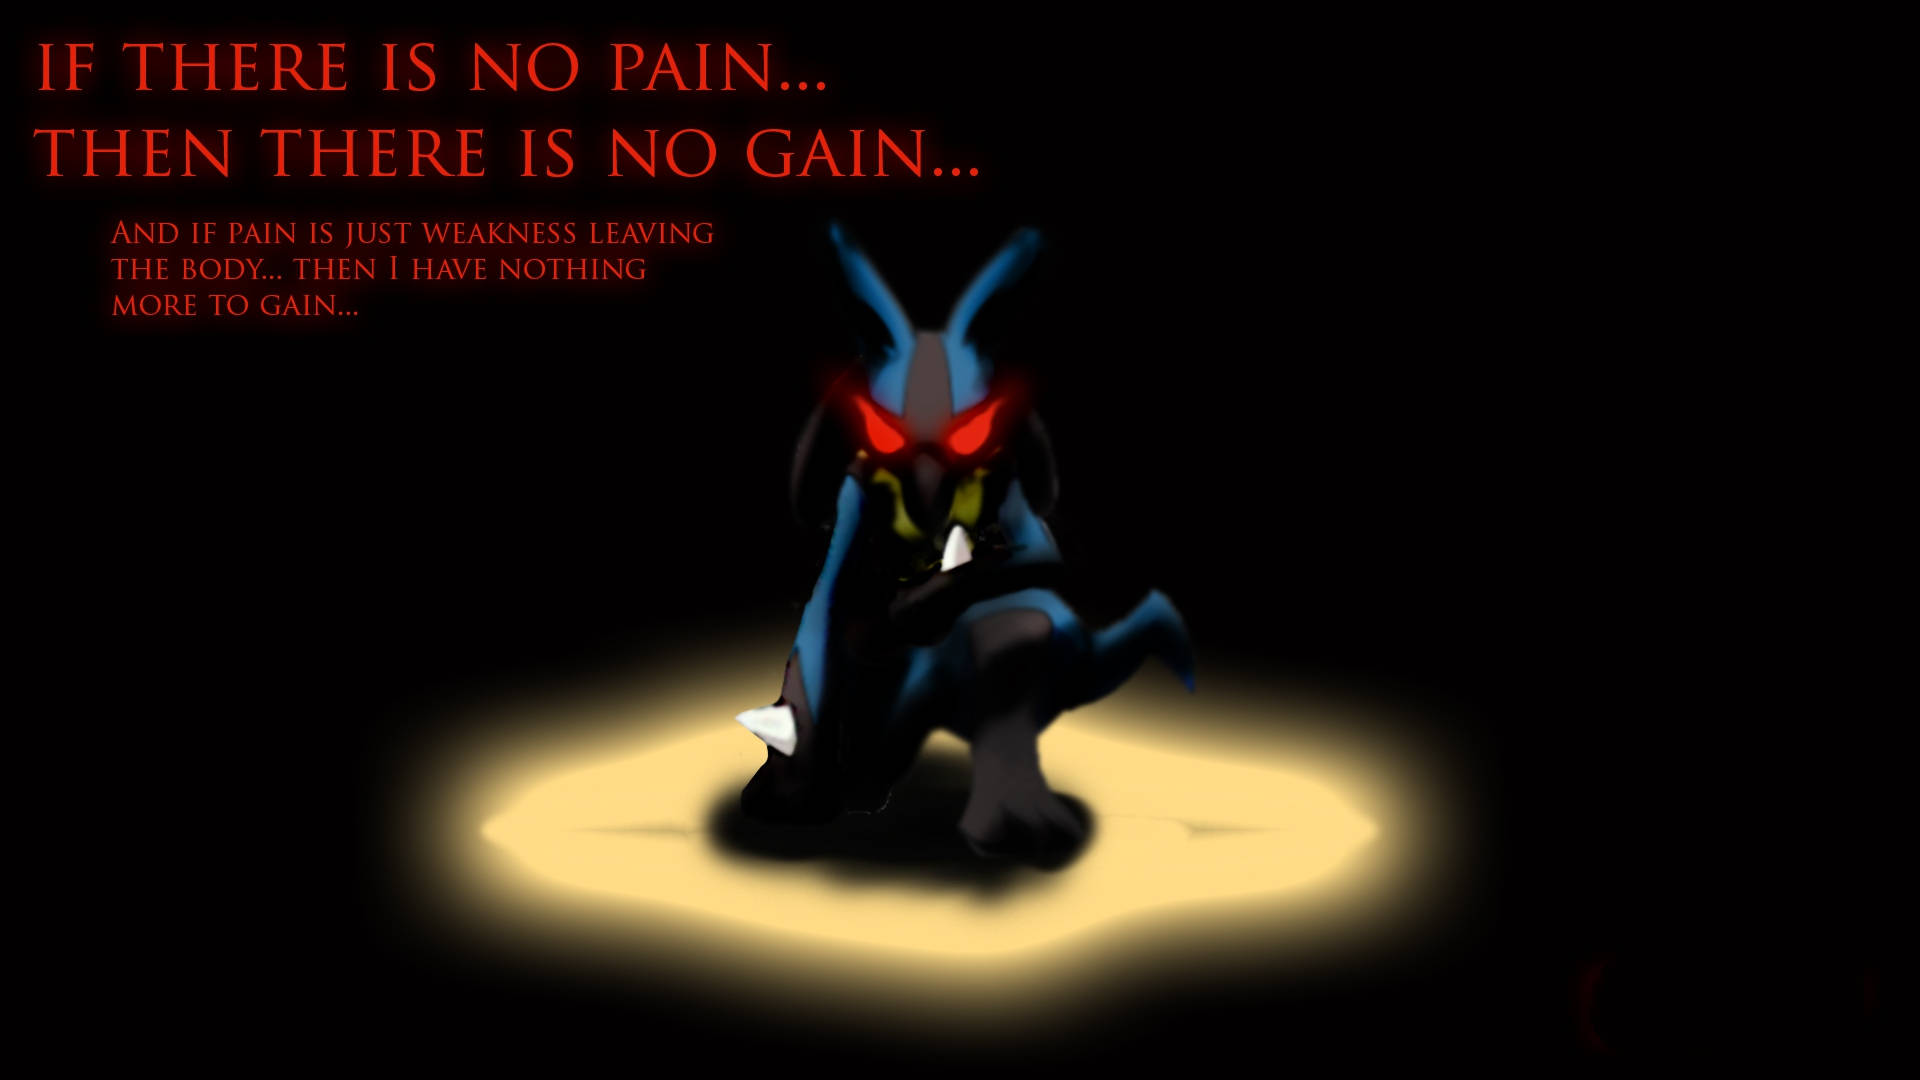 Get lost in the mysterious, endless depths of Lucario's intense red eyes Wallpaper